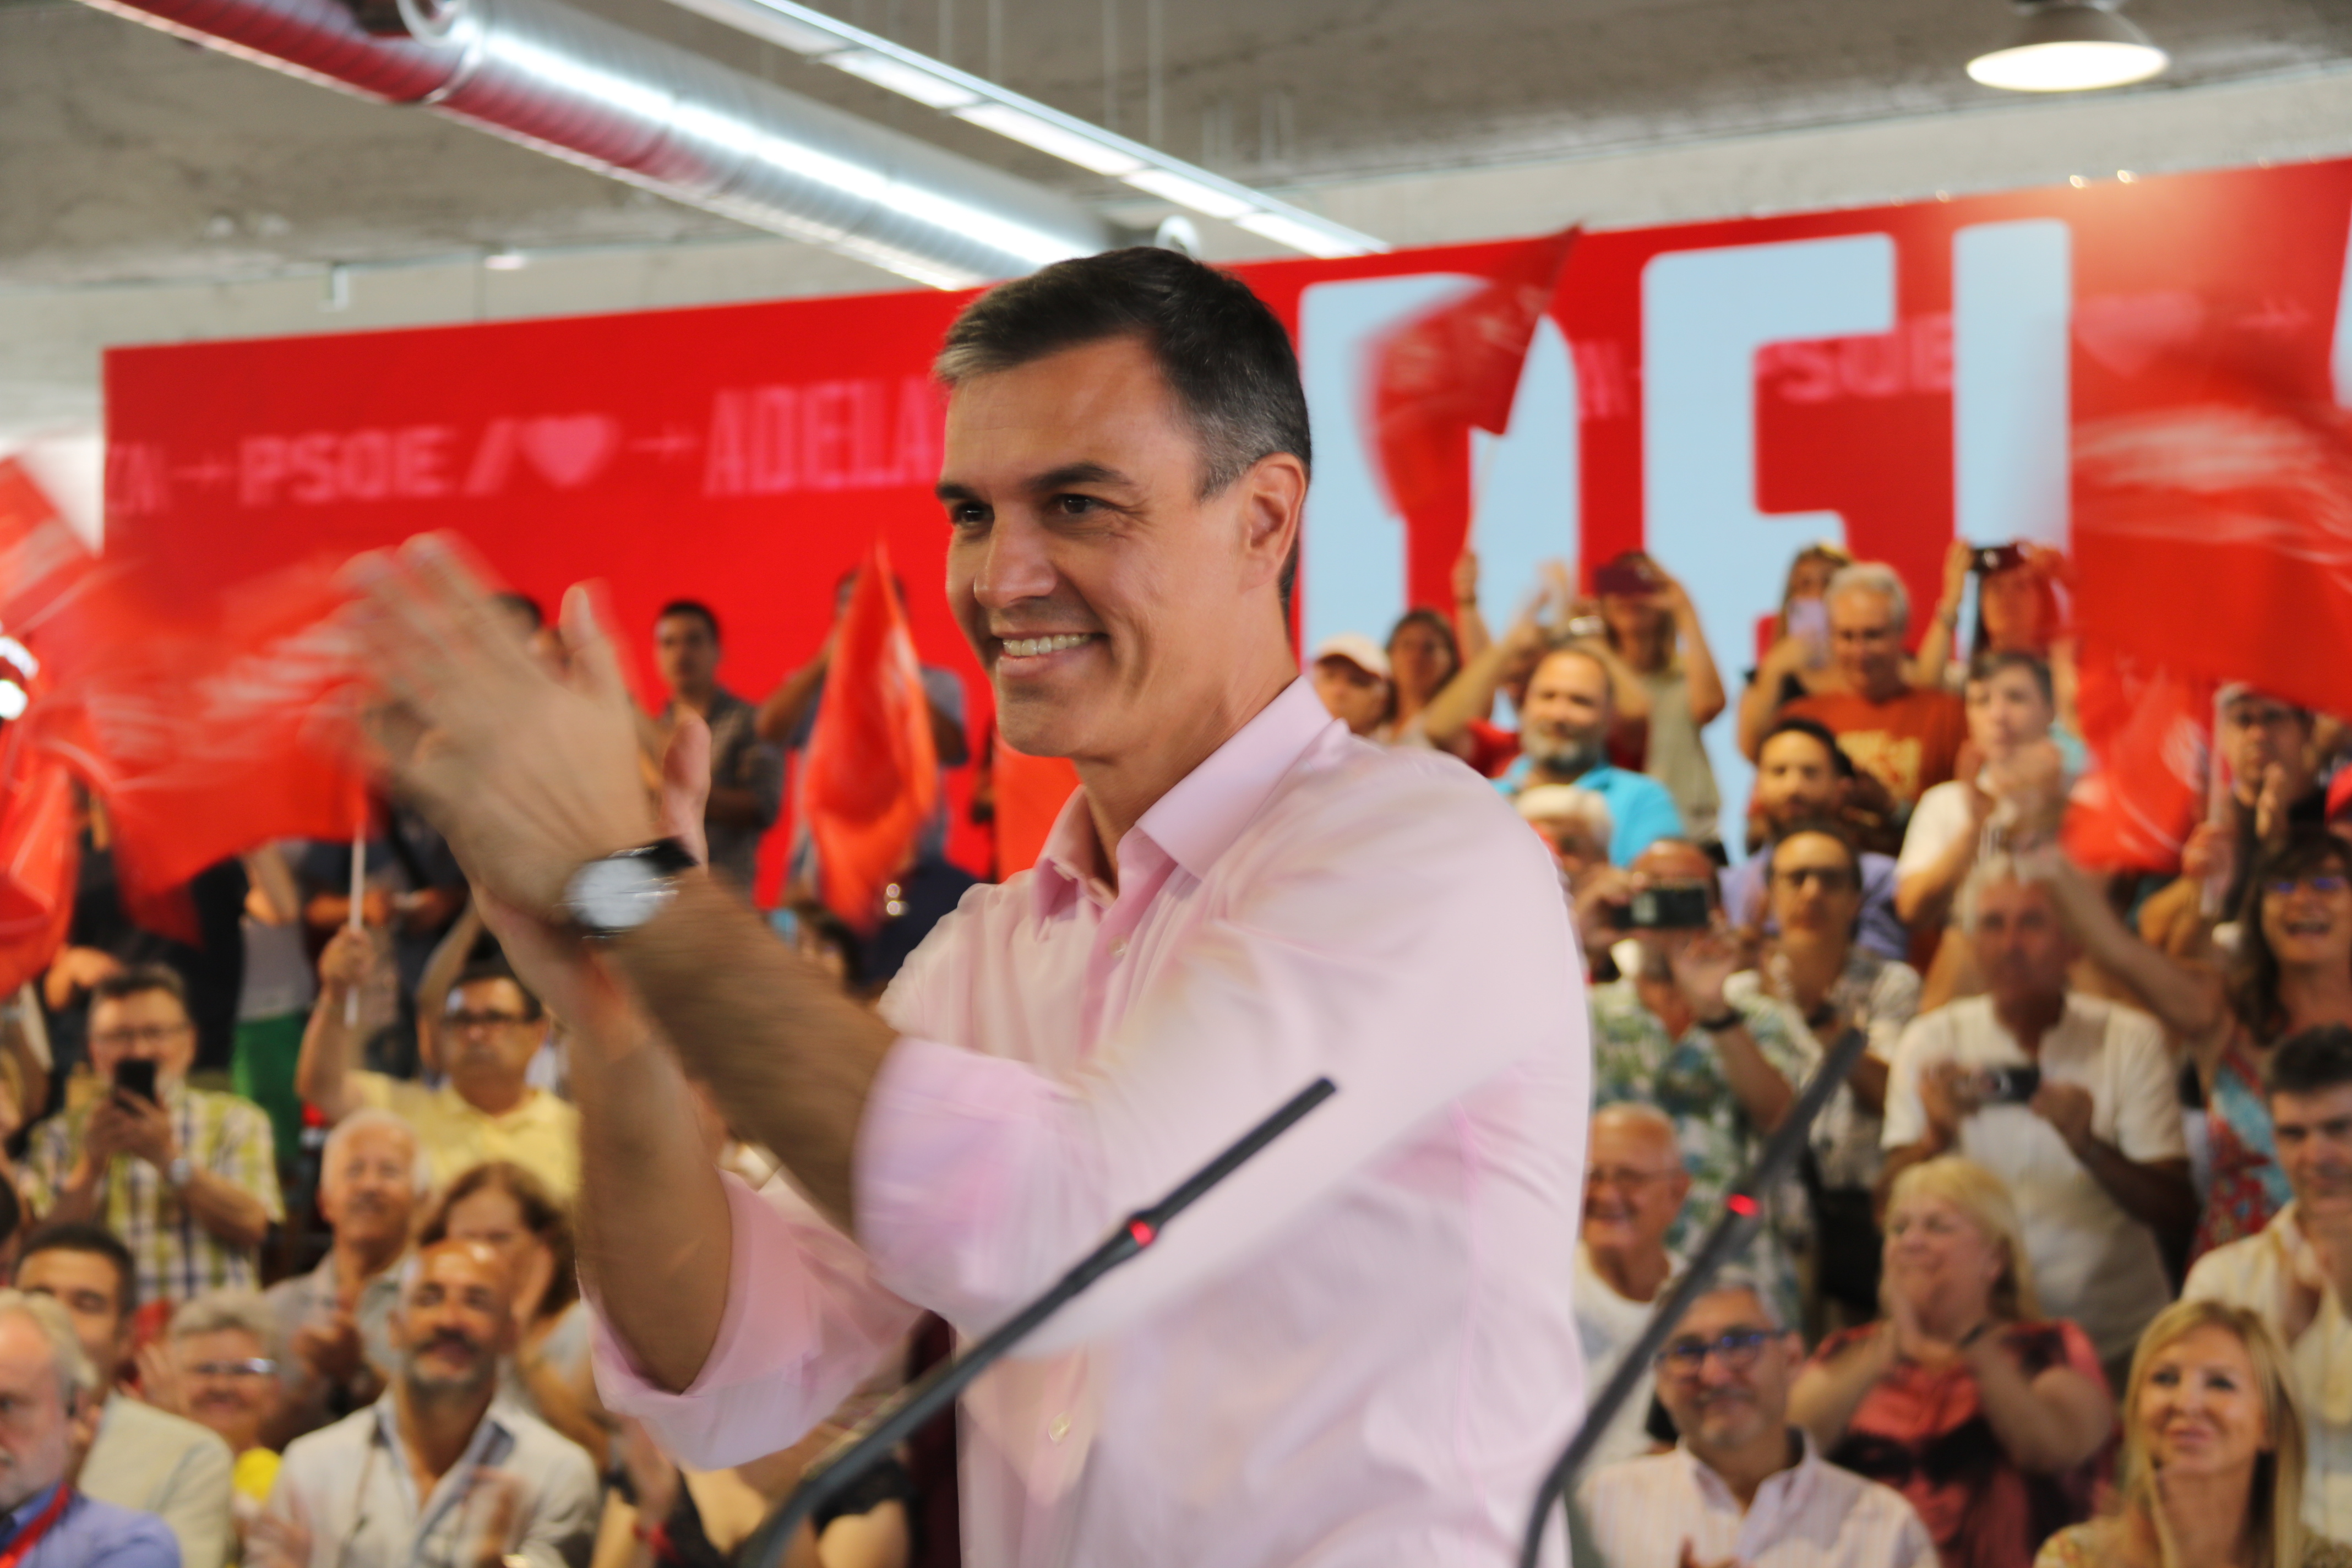 Socialist PM candidate for July 23 election Pedro Sánchez on July 6, 2023